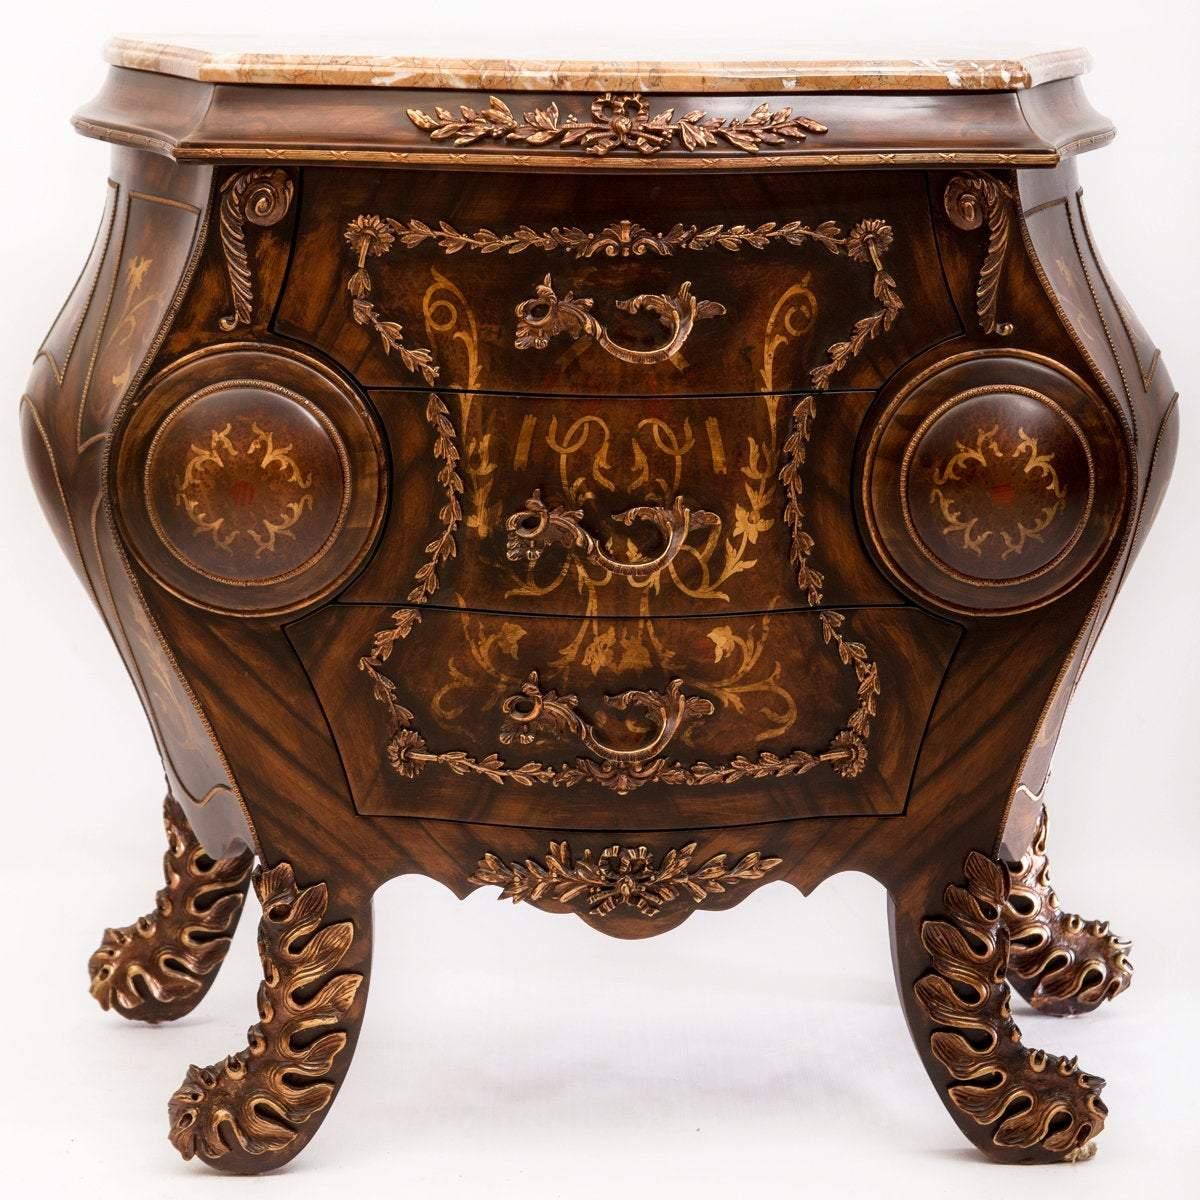 A beautiful loui XV style curved commode with marble top (condensed), 20th century.

The Louis XV style curved commode with marble top is inspired by Louis XV furniture style. This style is widely known for its lavishly decorated pieces. It is